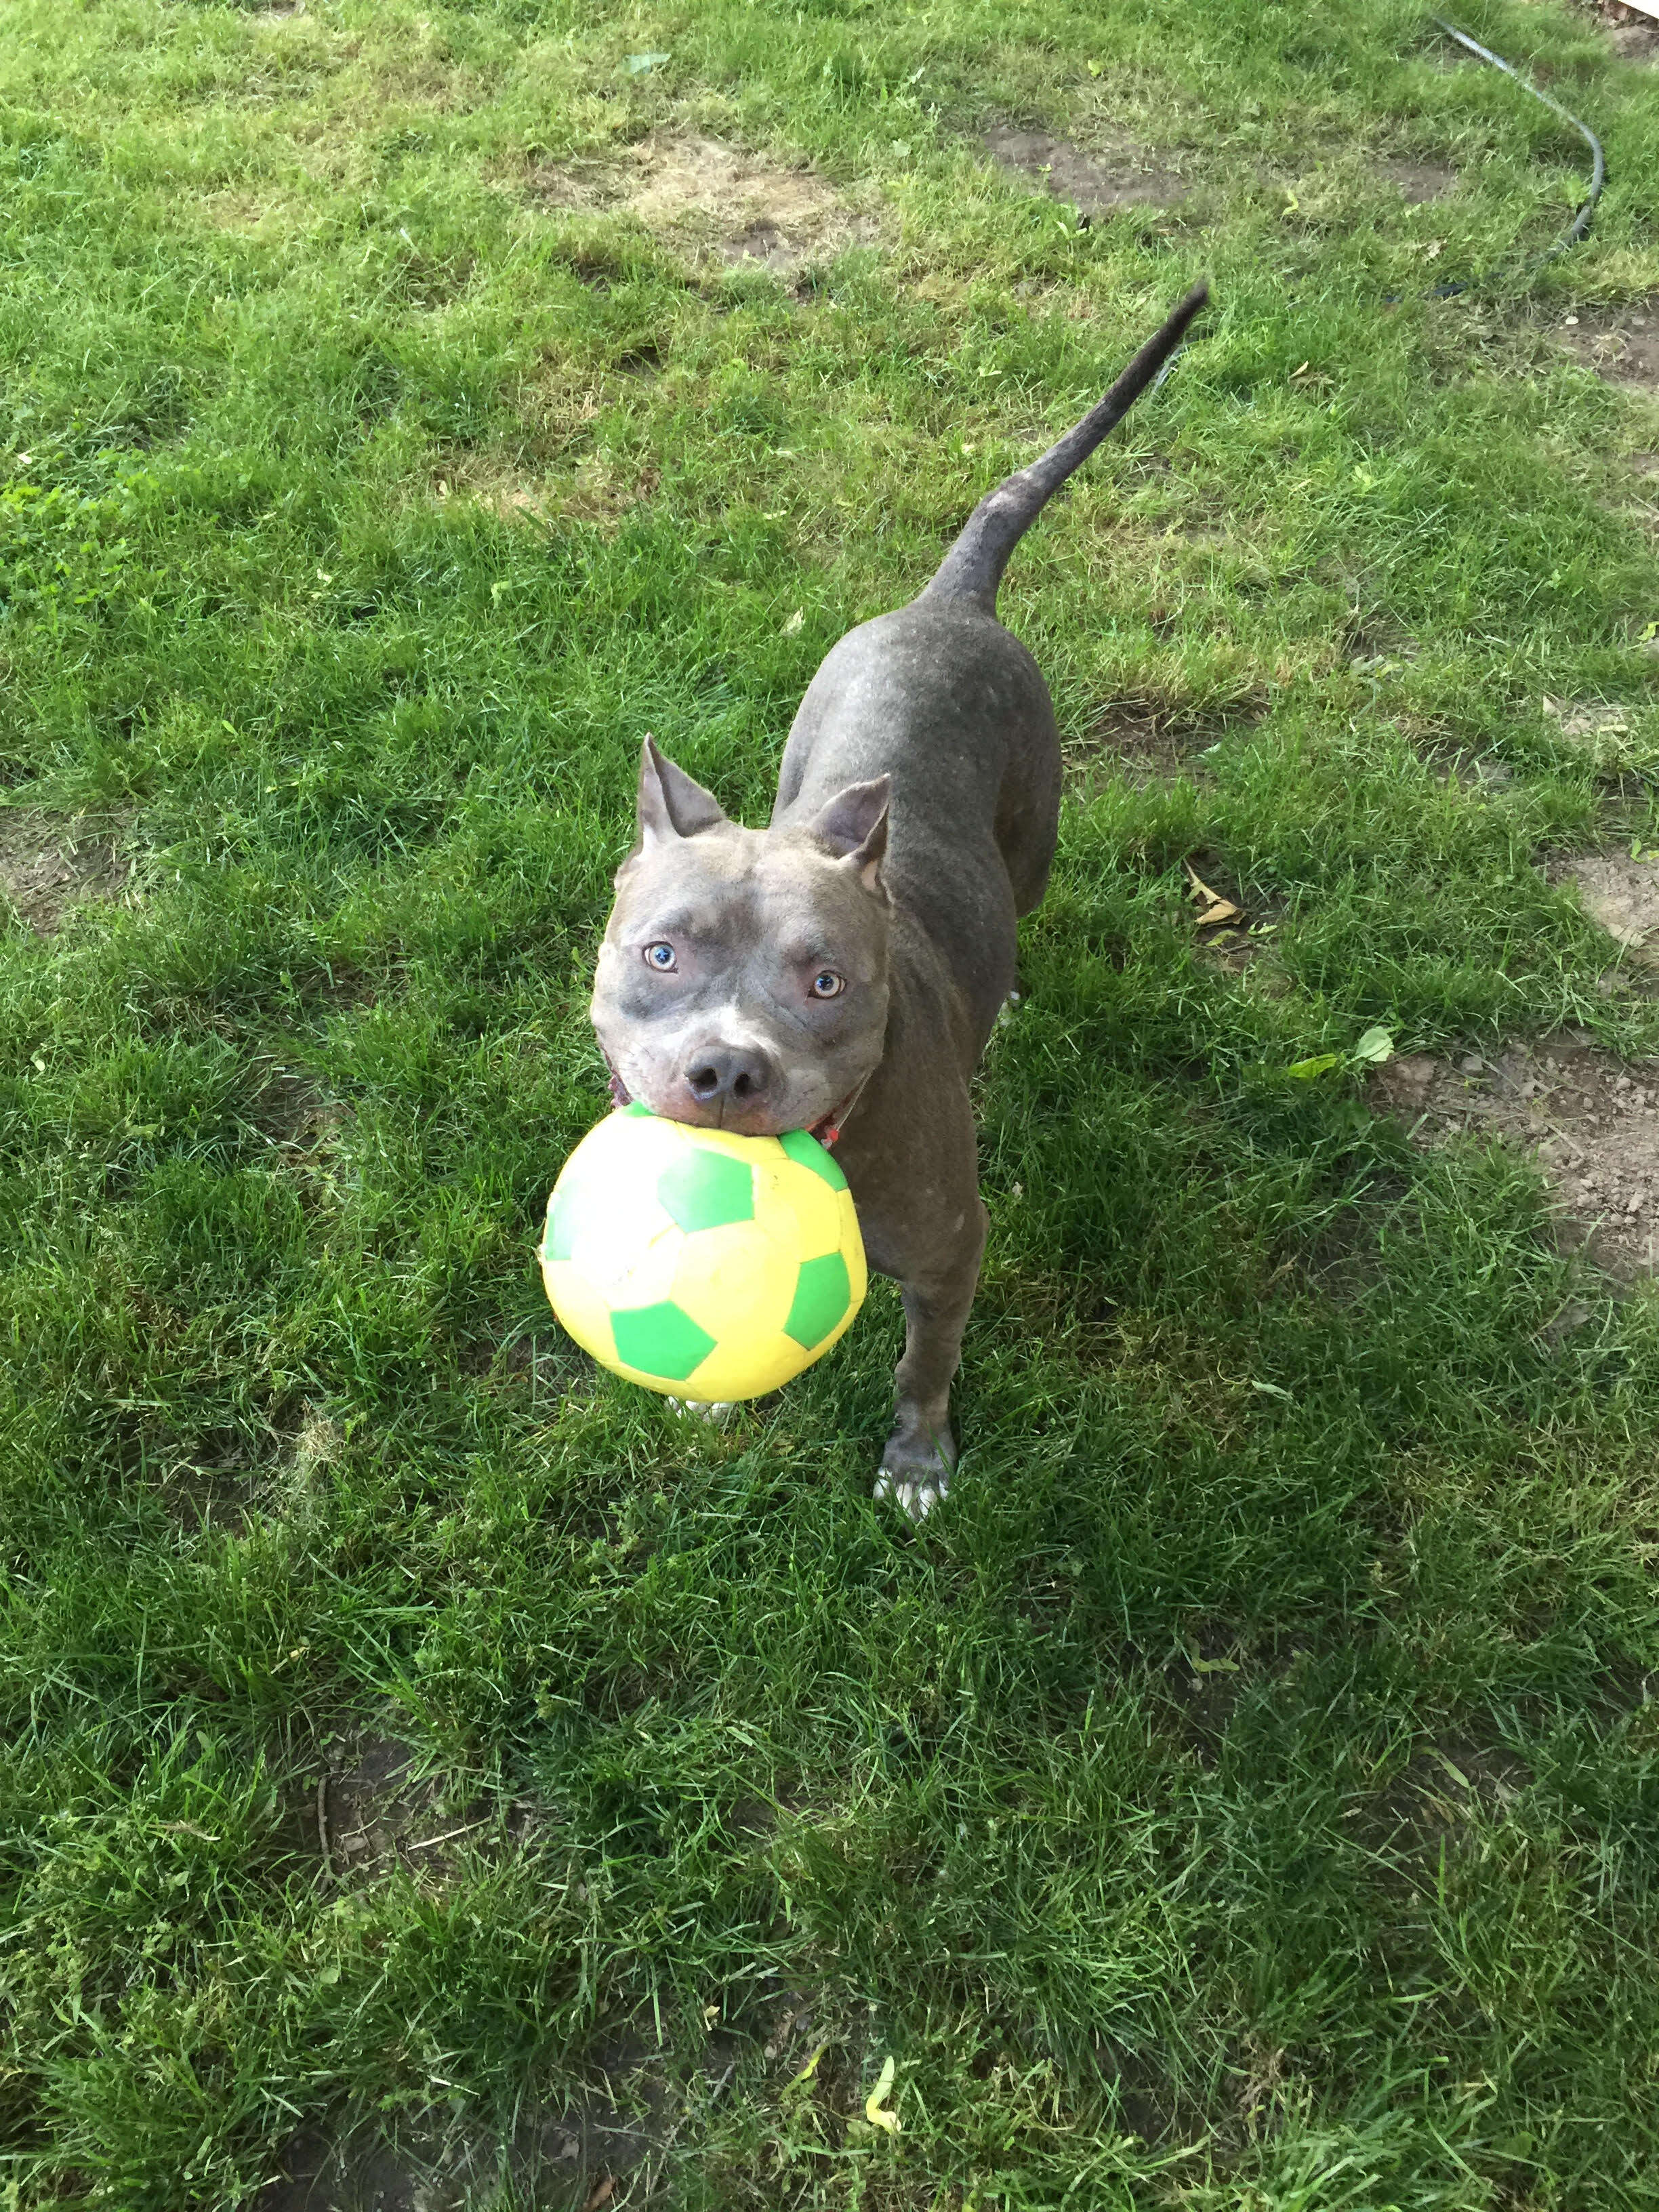 Rescued pit bull playing with ball